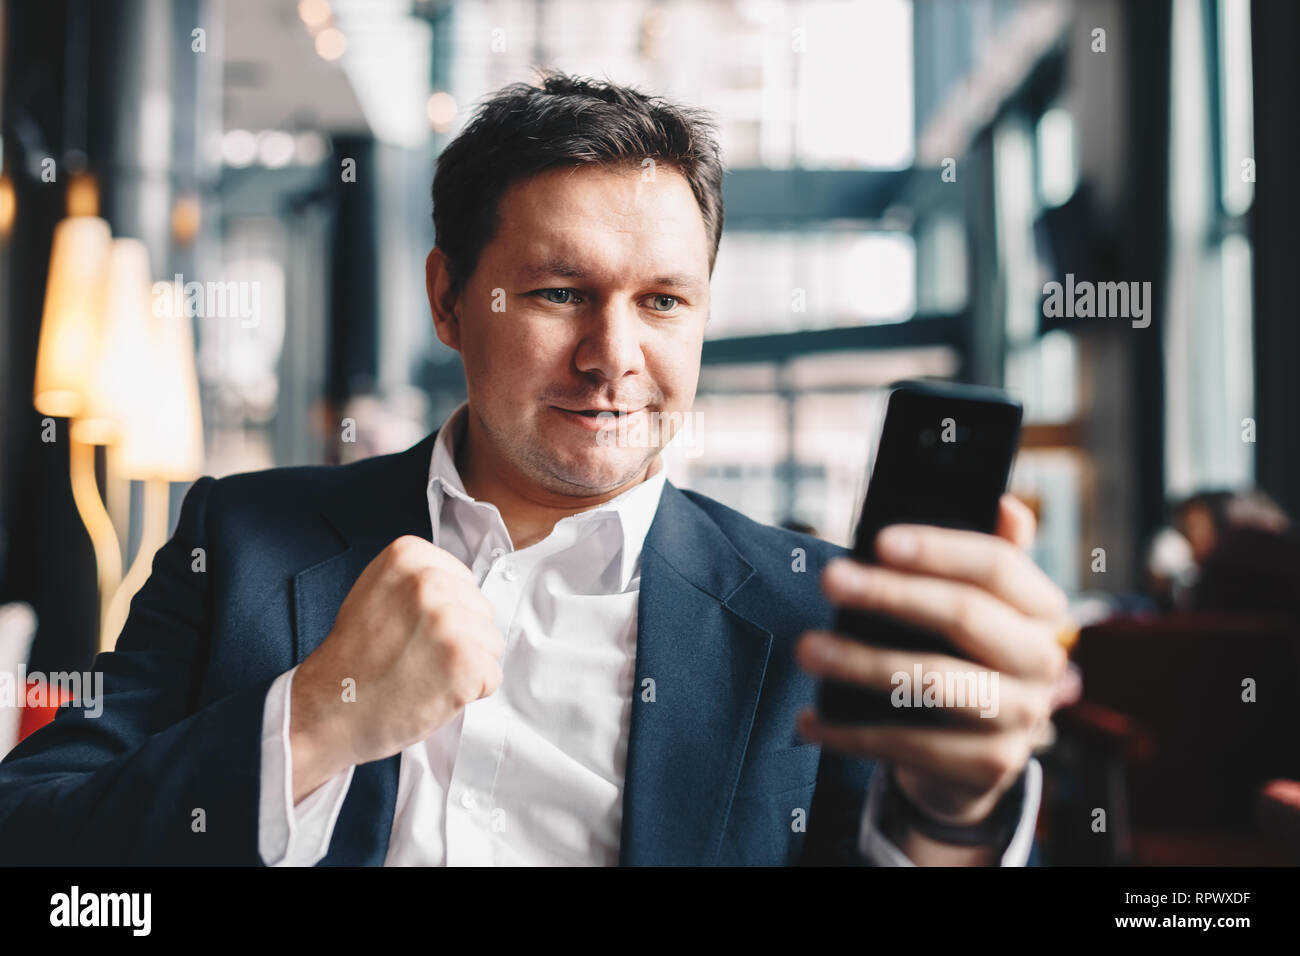 Excited young businessman sitting in a bar and holding mobile phone, raising a hand in celebration after receiving the news of making money on an inve Stock Photo